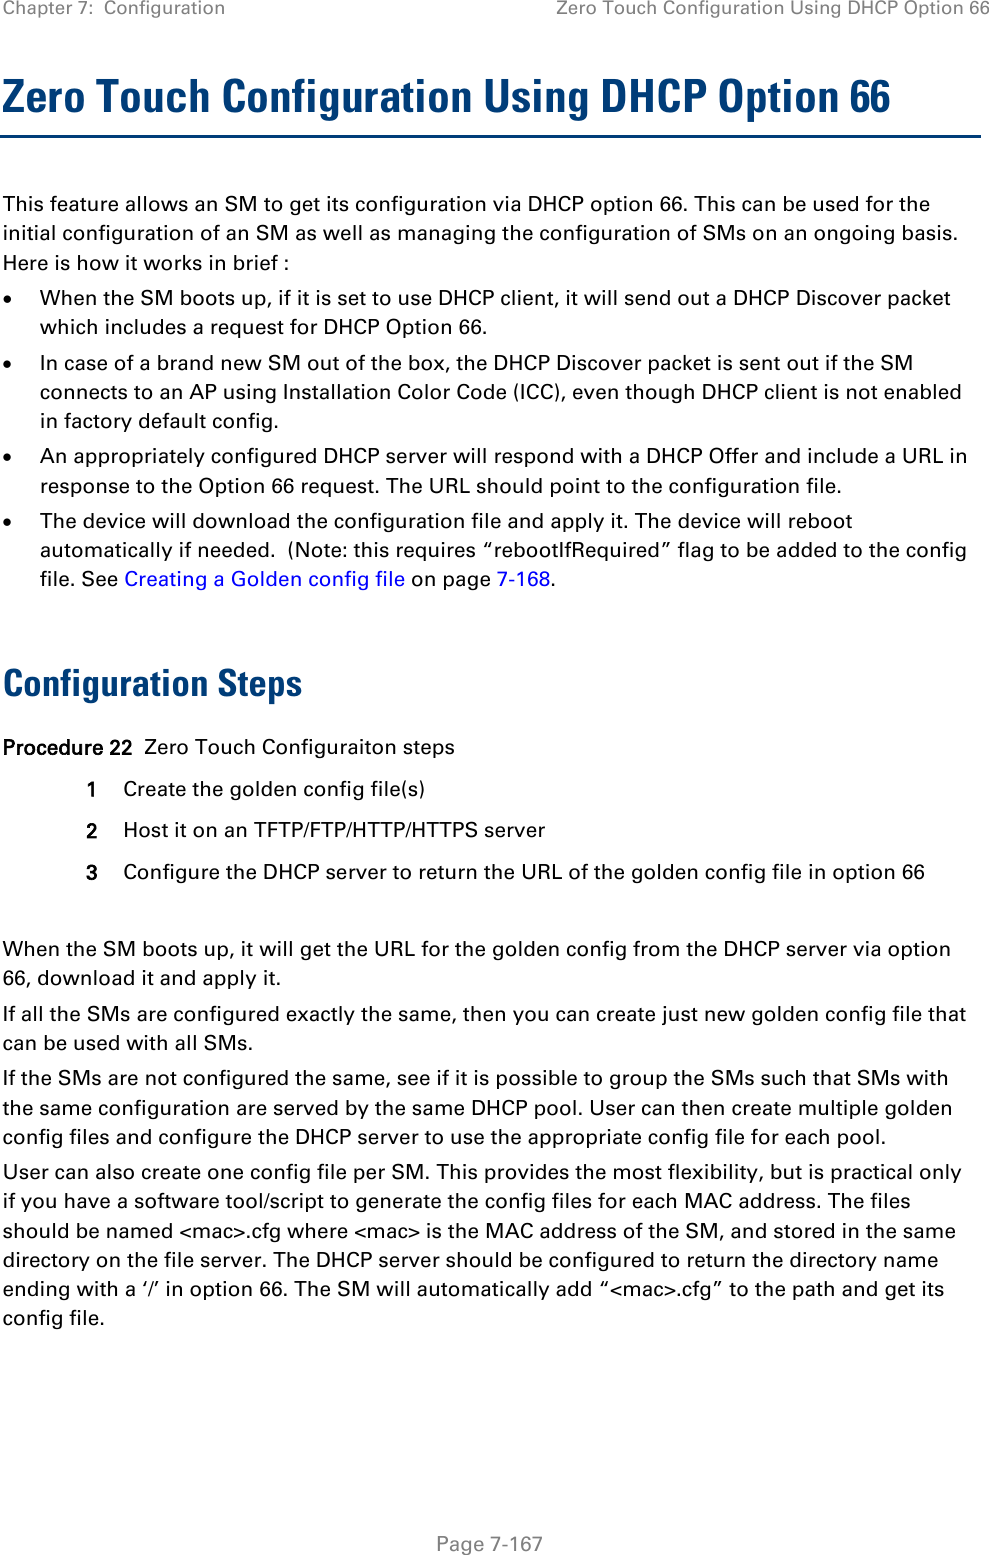 Chapter 7:  Configuration Zero Touch Configuration Using DHCP Option 66   Page 7-167 Zero Touch Configuration Using DHCP Option 66 This feature allows an SM to get its configuration via DHCP option 66. This can be used for the initial configuration of an SM as well as managing the configuration of SMs on an ongoing basis. Here is how it works in brief : • When the SM boots up, if it is set to use DHCP client, it will send out a DHCP Discover packet which includes a request for DHCP Option 66. • In case of a brand new SM out of the box, the DHCP Discover packet is sent out if the SM connects to an AP using Installation Color Code (ICC), even though DHCP client is not enabled in factory default config.  • An appropriately configured DHCP server will respond with a DHCP Offer and include a URL in response to the Option 66 request. The URL should point to the configuration file. • The device will download the configuration file and apply it. The device will reboot automatically if needed.  (Note: this requires “rebootIfRequired” flag to be added to the config file. See Creating a Golden config file on page 7-168.  Configuration Steps Procedure 22  Zero Touch Configuraiton steps 1 Create the golden config file(s) 2 Host it on an TFTP/FTP/HTTP/HTTPS server 3 Configure the DHCP server to return the URL of the golden config file in option 66  When the SM boots up, it will get the URL for the golden config from the DHCP server via option 66, download it and apply it. If all the SMs are configured exactly the same, then you can create just new golden config file that can be used with all SMs.  If the SMs are not configured the same, see if it is possible to group the SMs such that SMs with the same configuration are served by the same DHCP pool. User can then create multiple golden config files and configure the DHCP server to use the appropriate config file for each pool. User can also create one config file per SM. This provides the most flexibility, but is practical only if you have a software tool/script to generate the config files for each MAC address. The files should be named &lt;mac&gt;.cfg where &lt;mac&gt; is the MAC address of the SM, and stored in the same directory on the file server. The DHCP server should be configured to return the directory name ending with a ‘/’ in option 66. The SM will automatically add “&lt;mac&gt;.cfg” to the path and get its config file. 